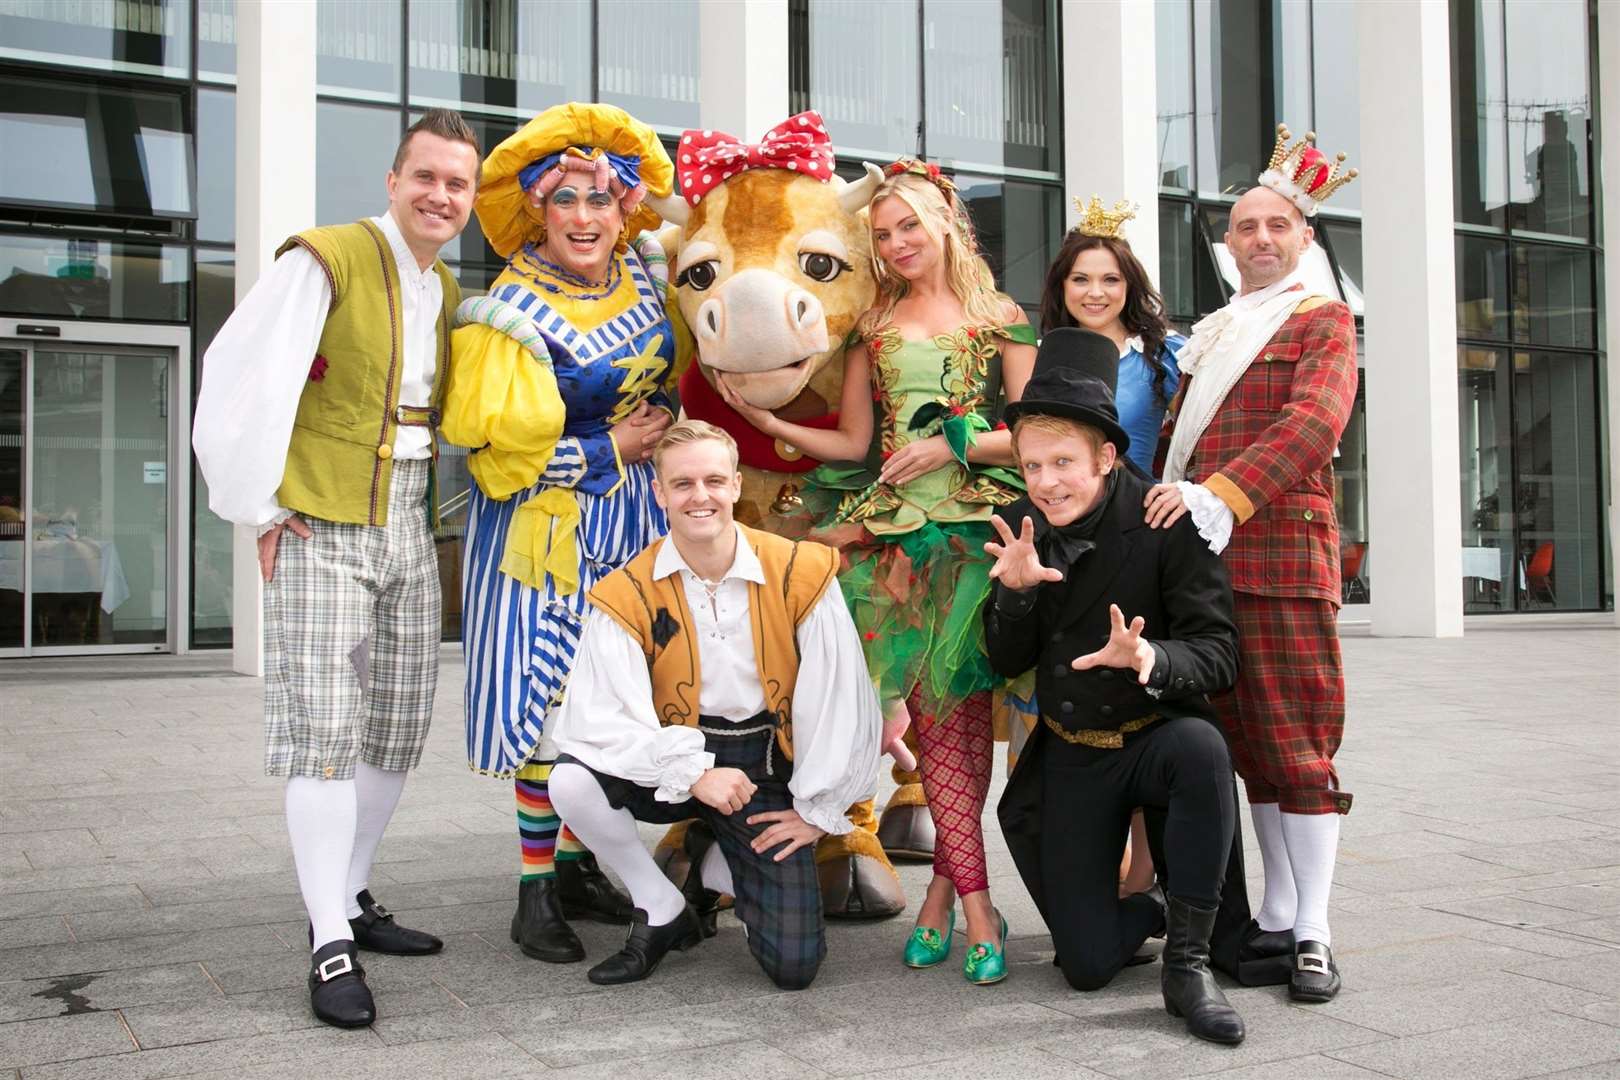 The cast of Jack and the Beanstalk when it was performed at The Marlowe Theatre, Canterbury in 2013